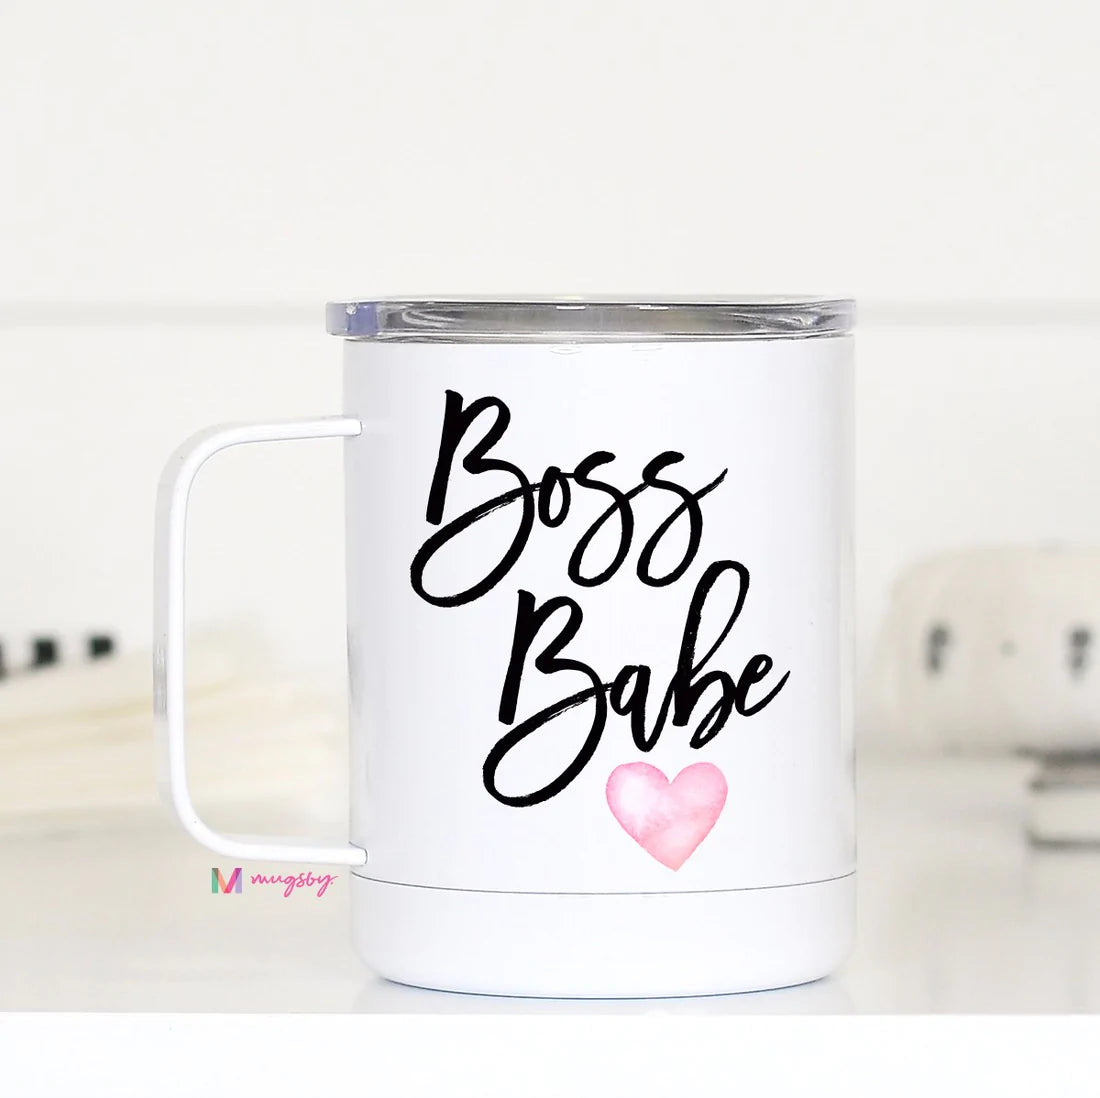 Boss Babe Travel Cup